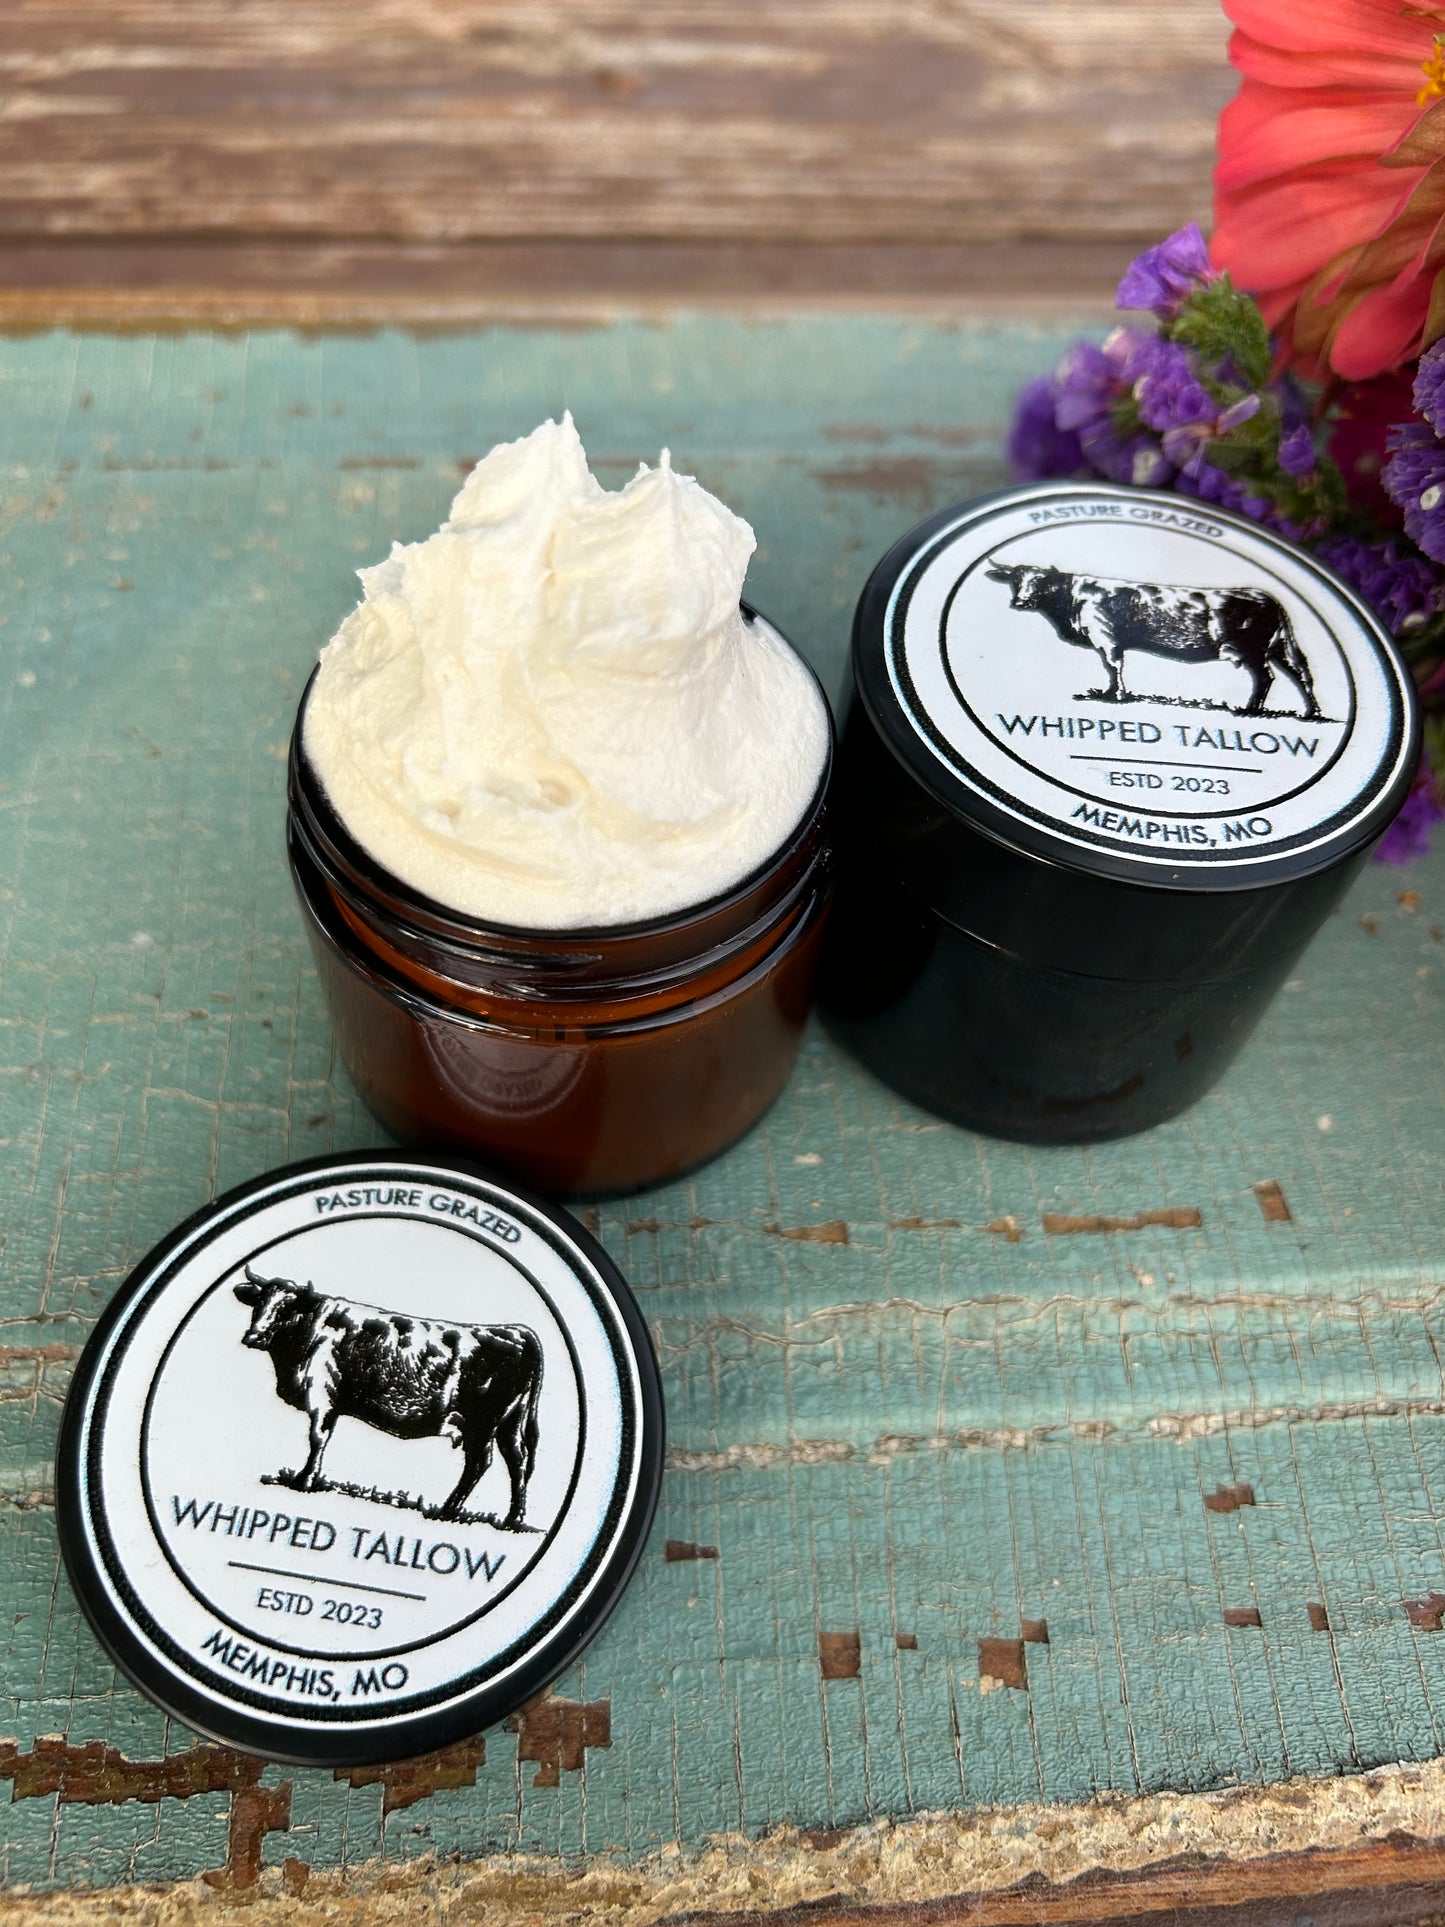 Whipped tallow cream.